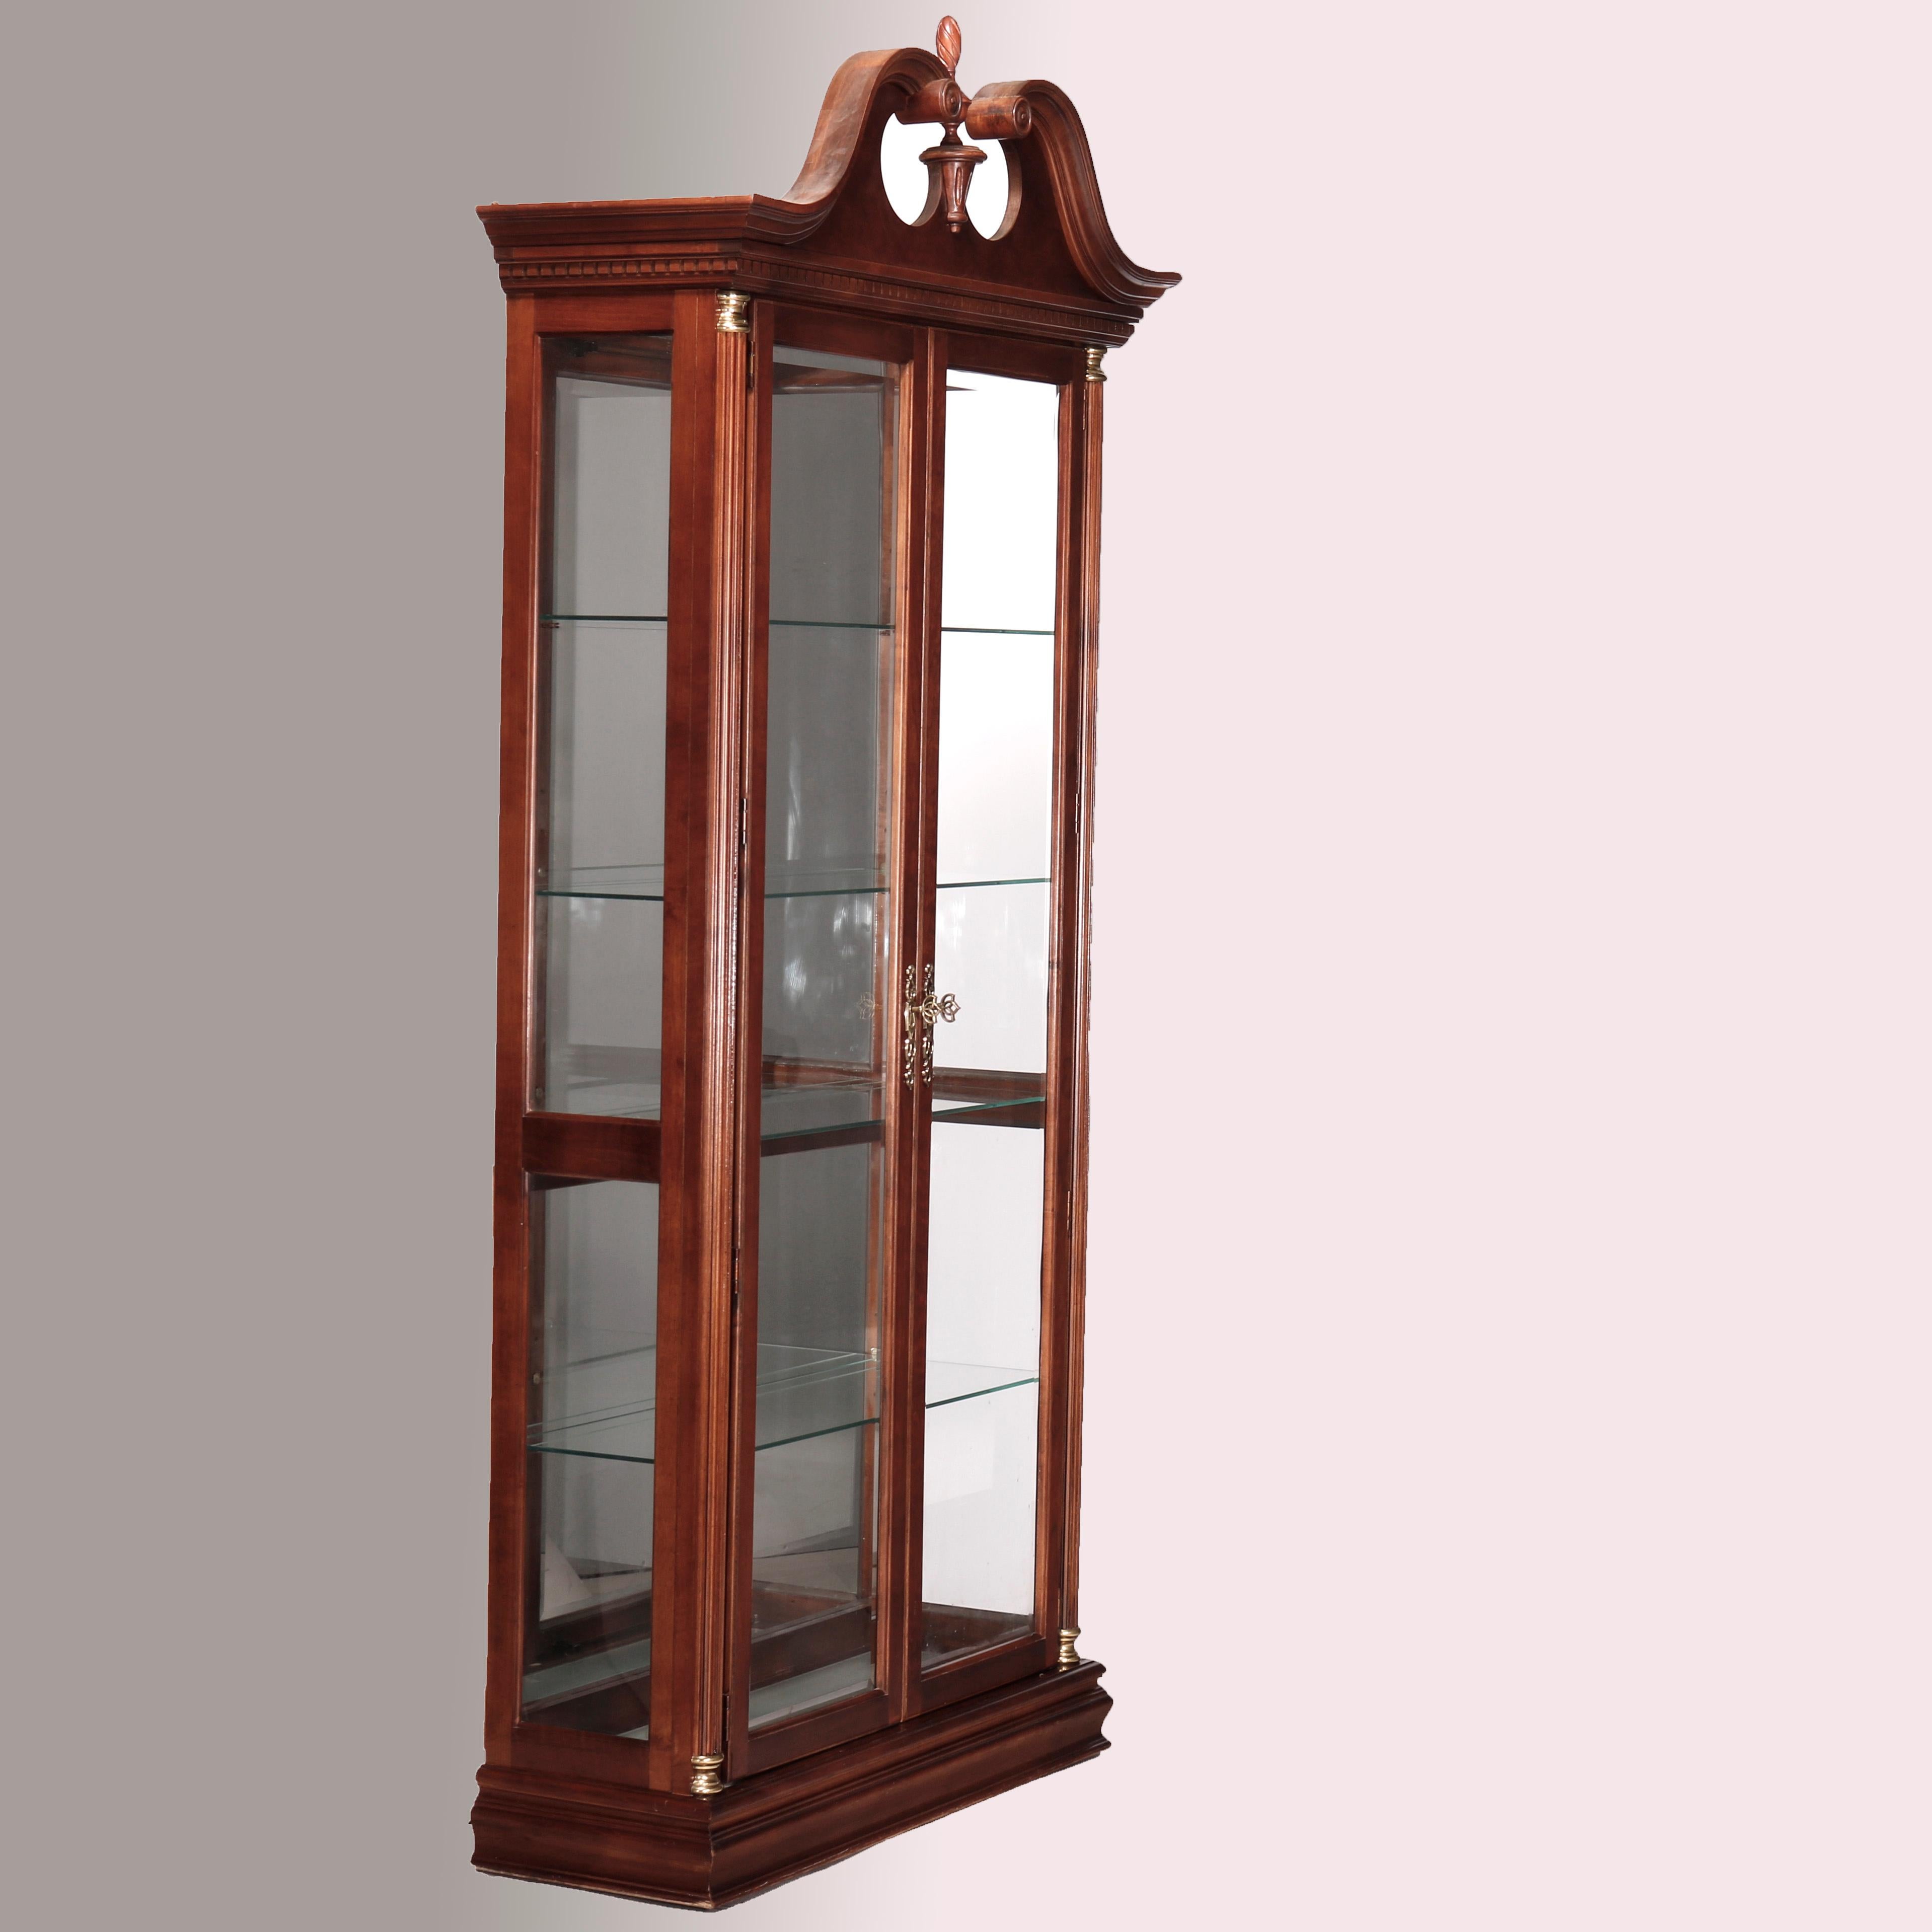 20th Century Federal Style Carved Mahogany Mirrored Display Cabinet by Pulaski, 20th C